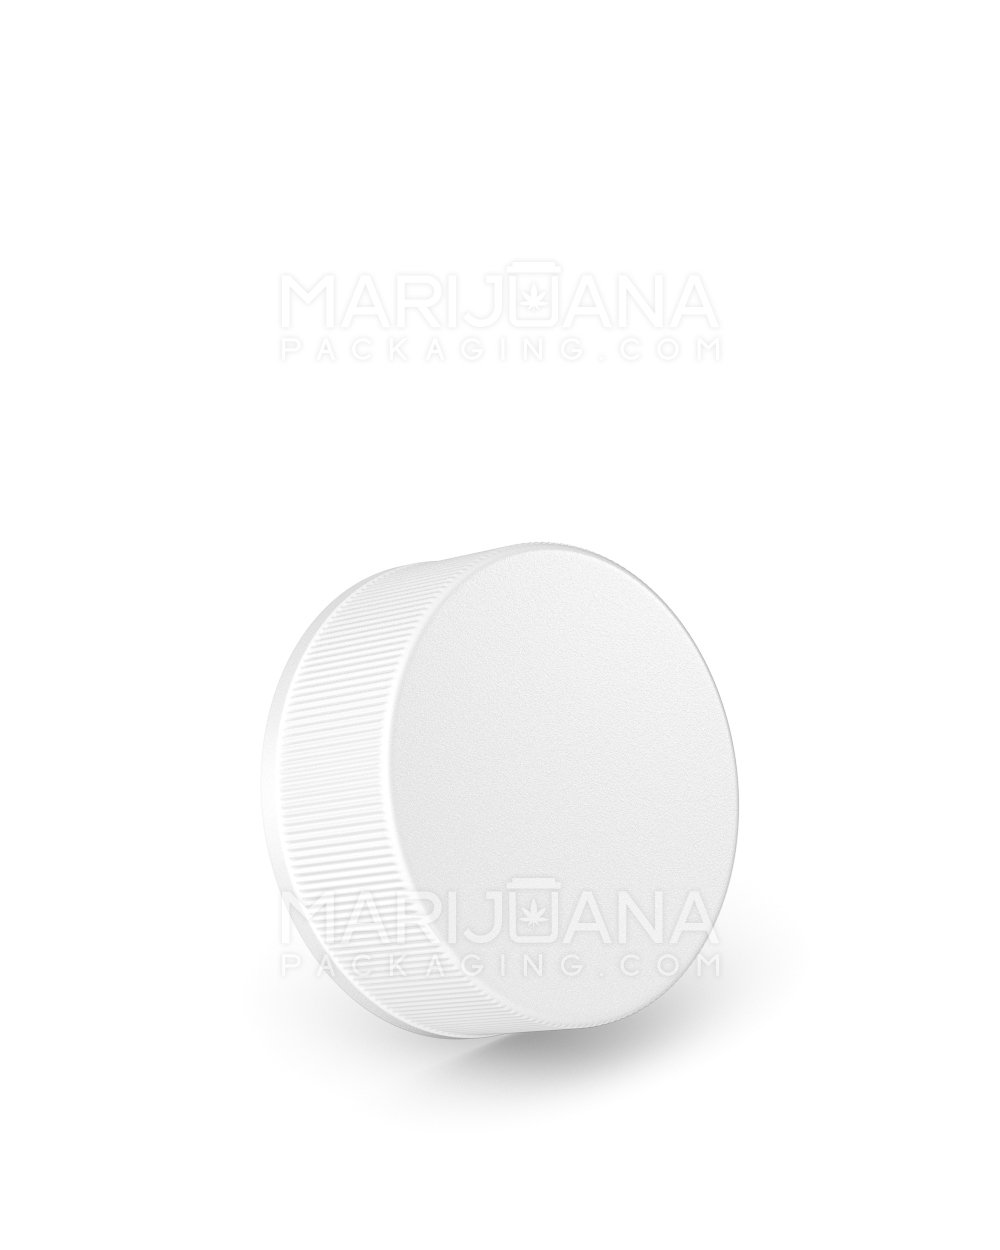 Child Resistant | Ribbed Push Down and Turn Plastic Caps w/ Foil Liner | 38mm - Semi Gloss White - 320 Count - 1